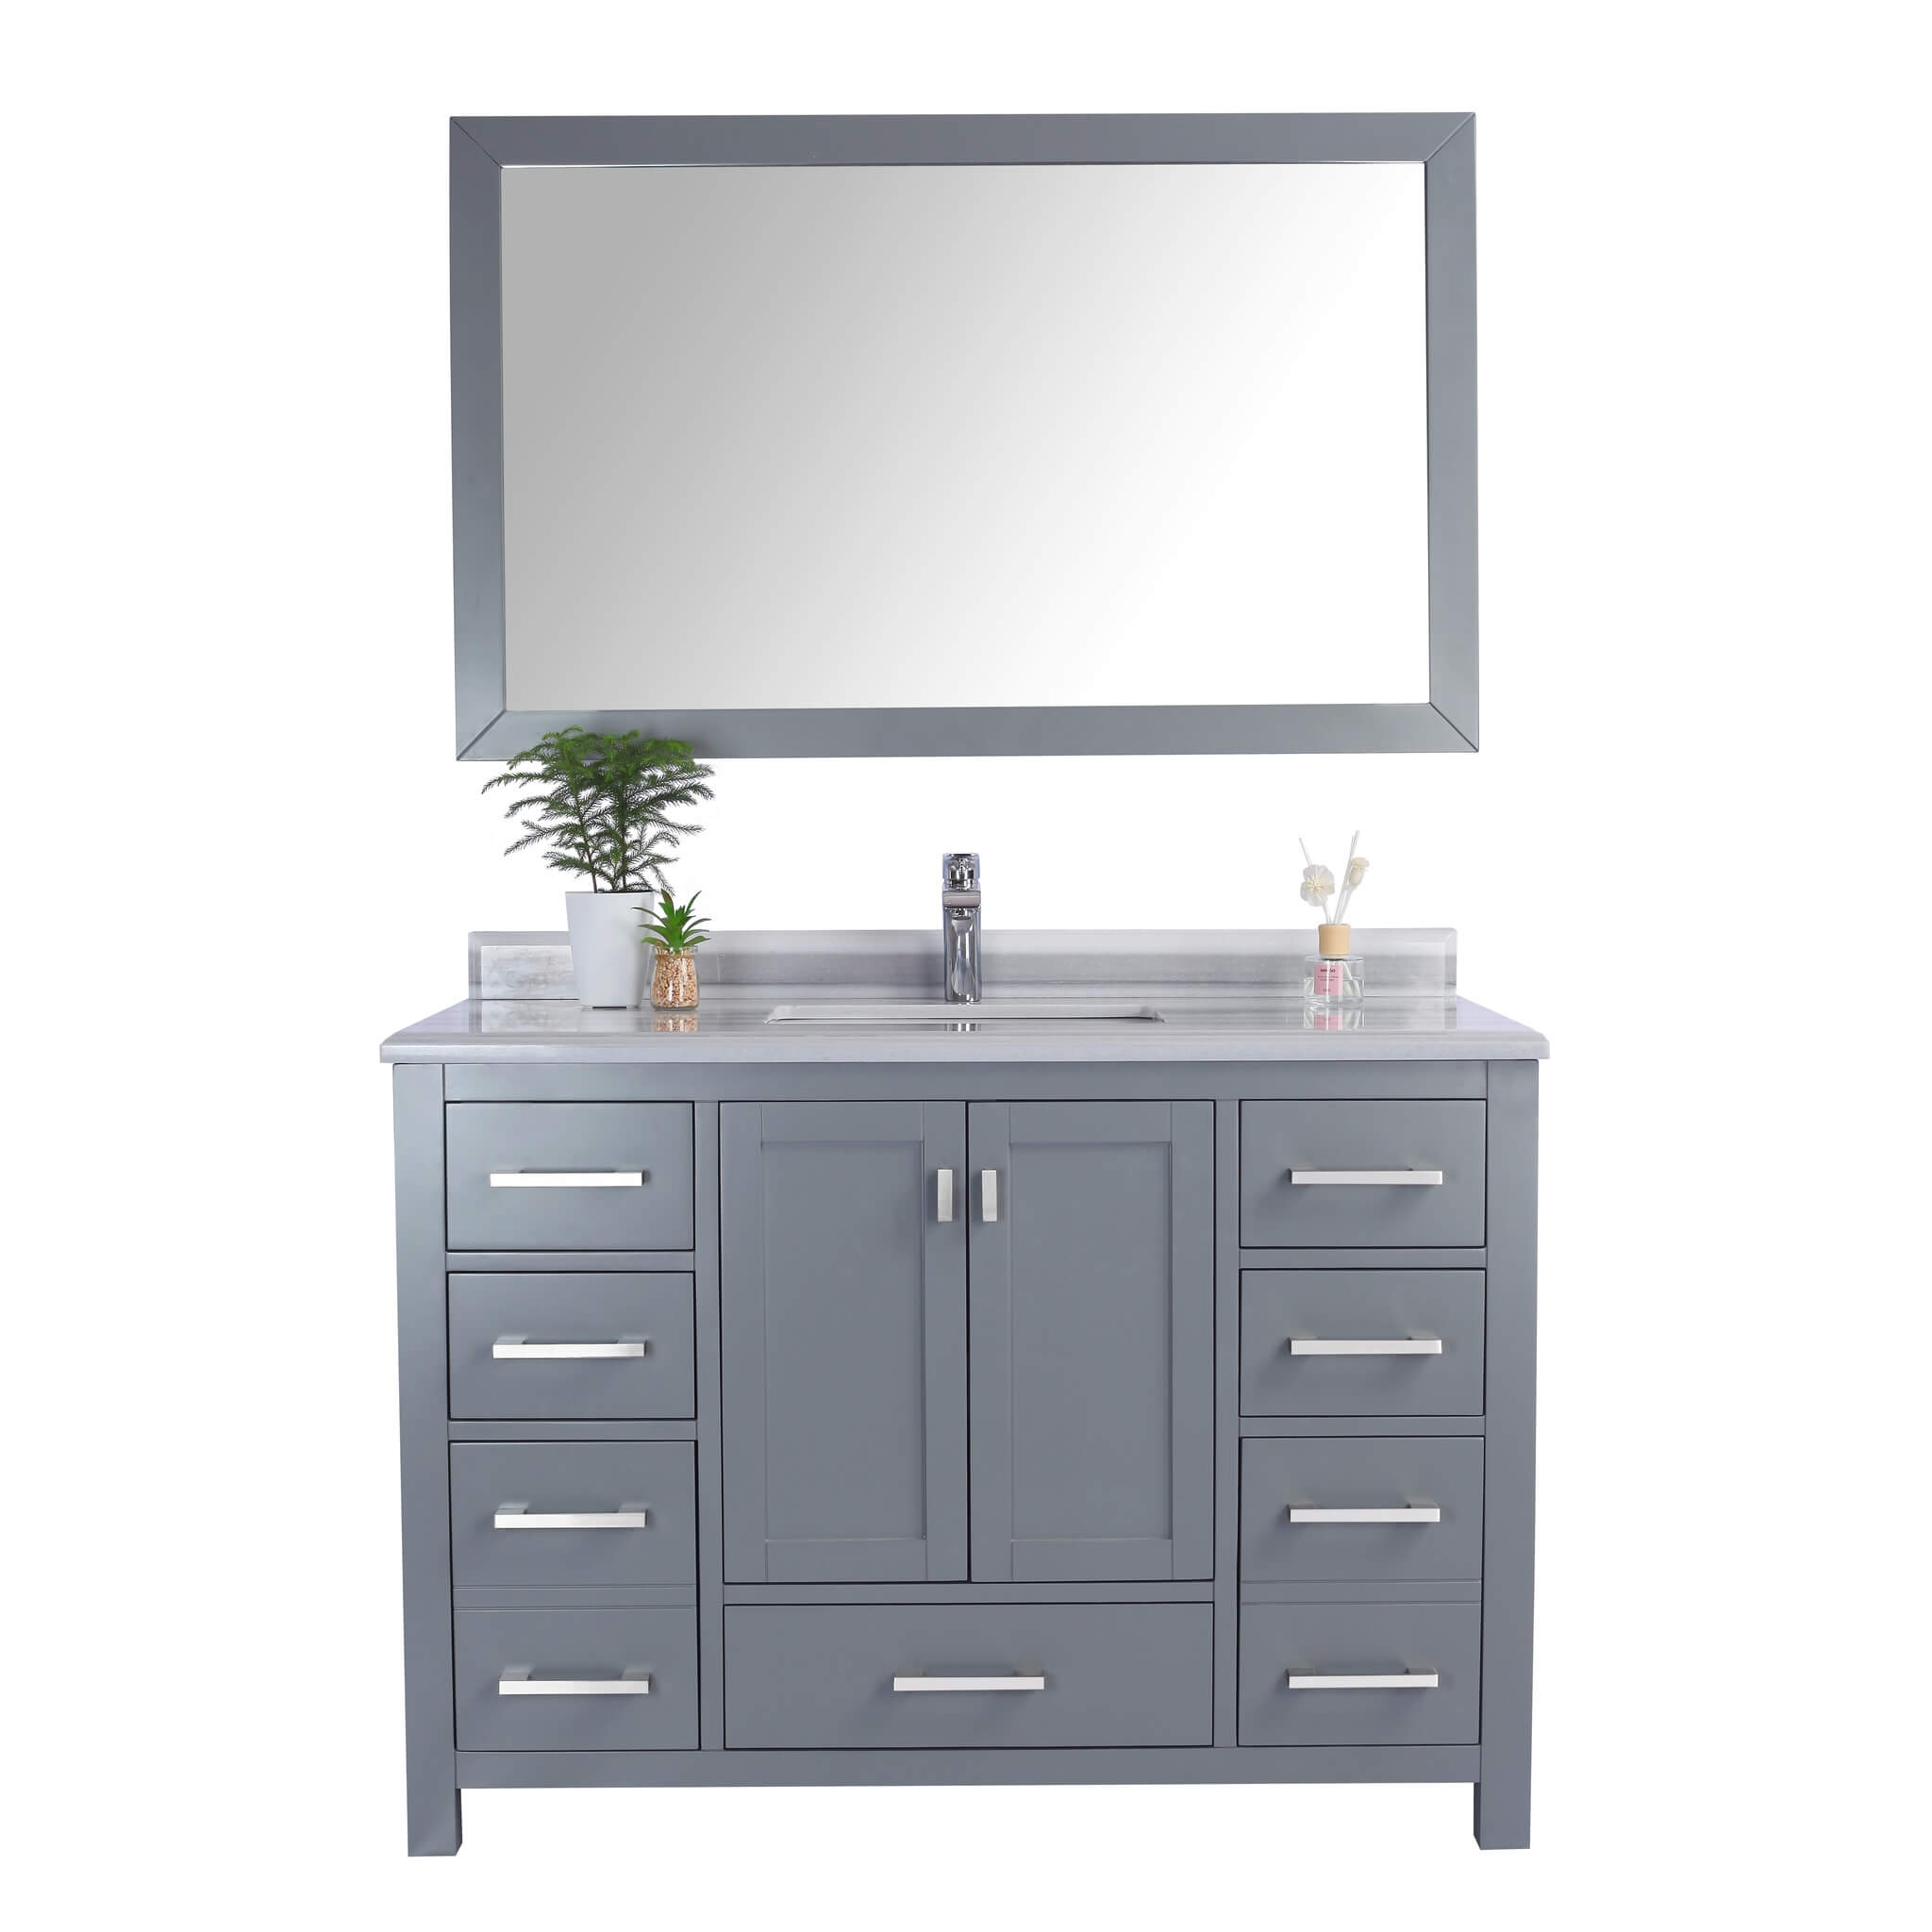 LAVIVA Wilson 313ANG-48G-WS 48" Single Bathroom Vanity in Grey with White Stripes Marble, White Rectangle Sink, Front View